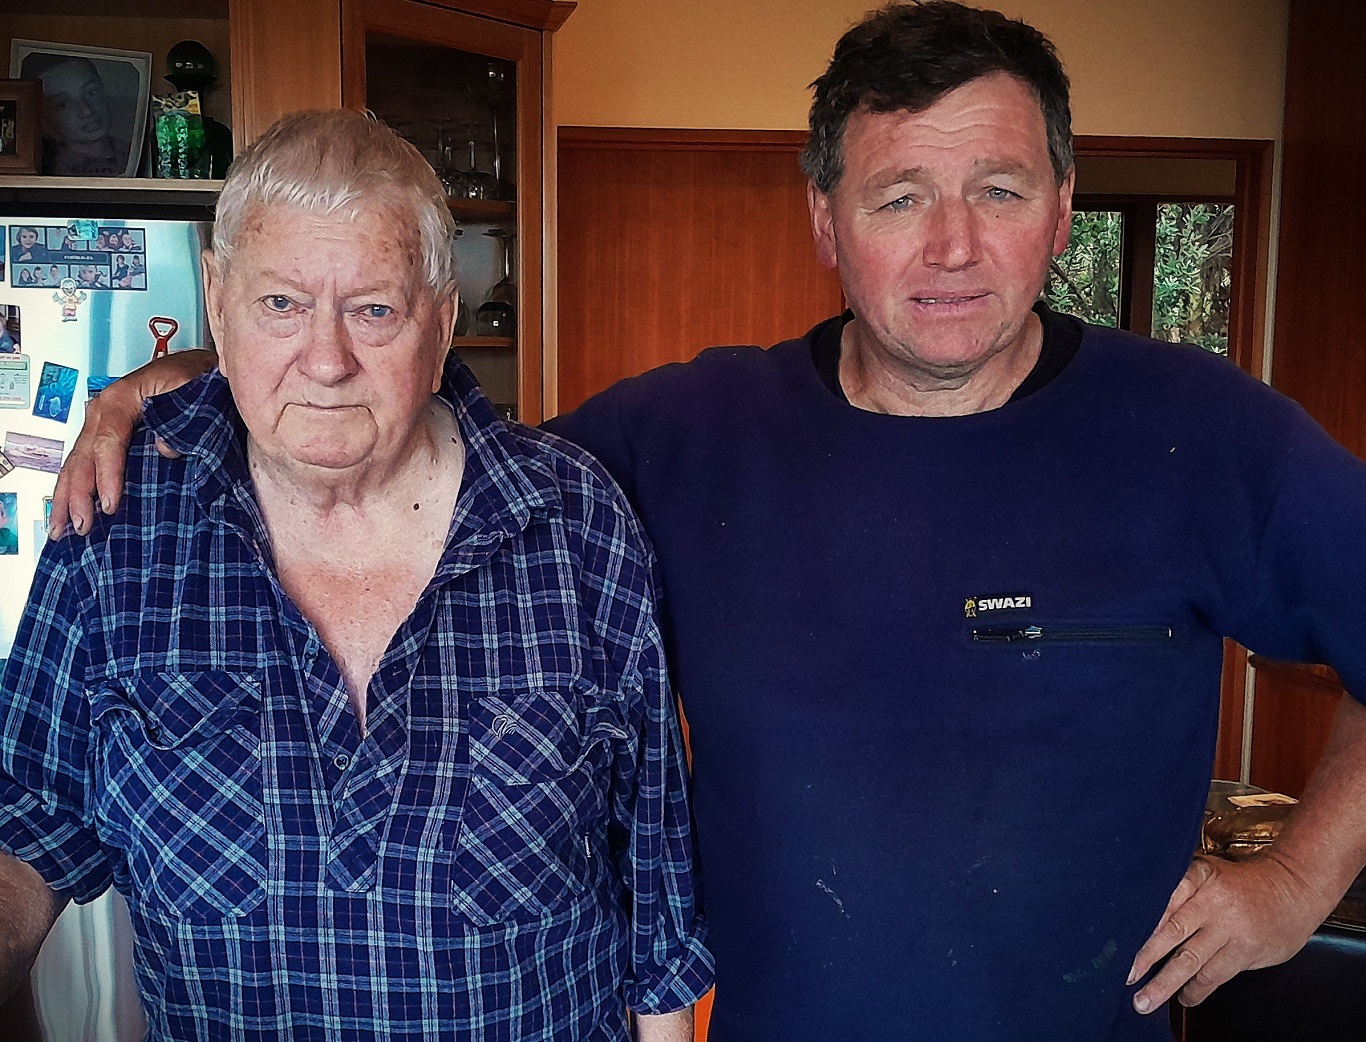 Stewart Island fisherman Ray Jamieson (right) says he and his uncle Owen Eriksson (left) feel a...